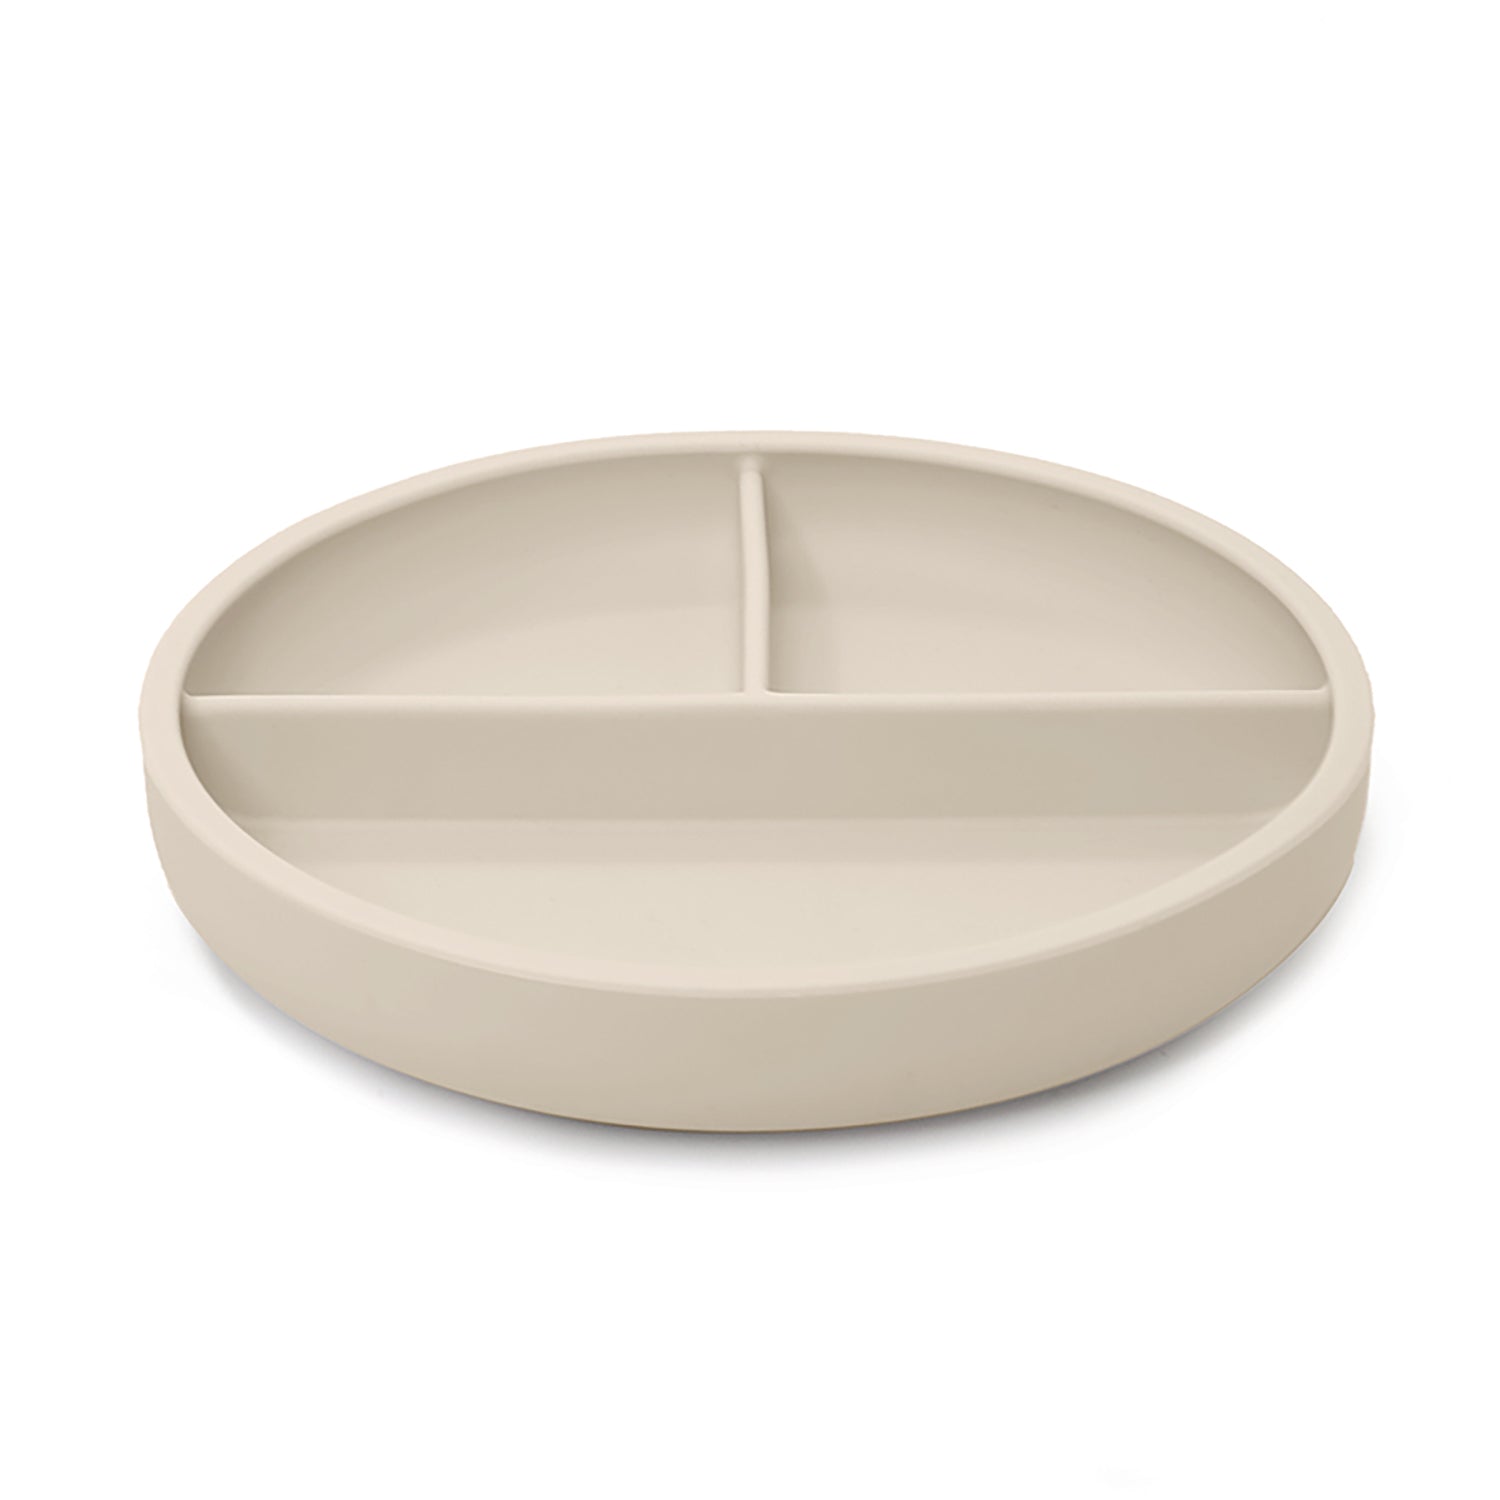 Allis Silicone Suction Divider Plate in Beige